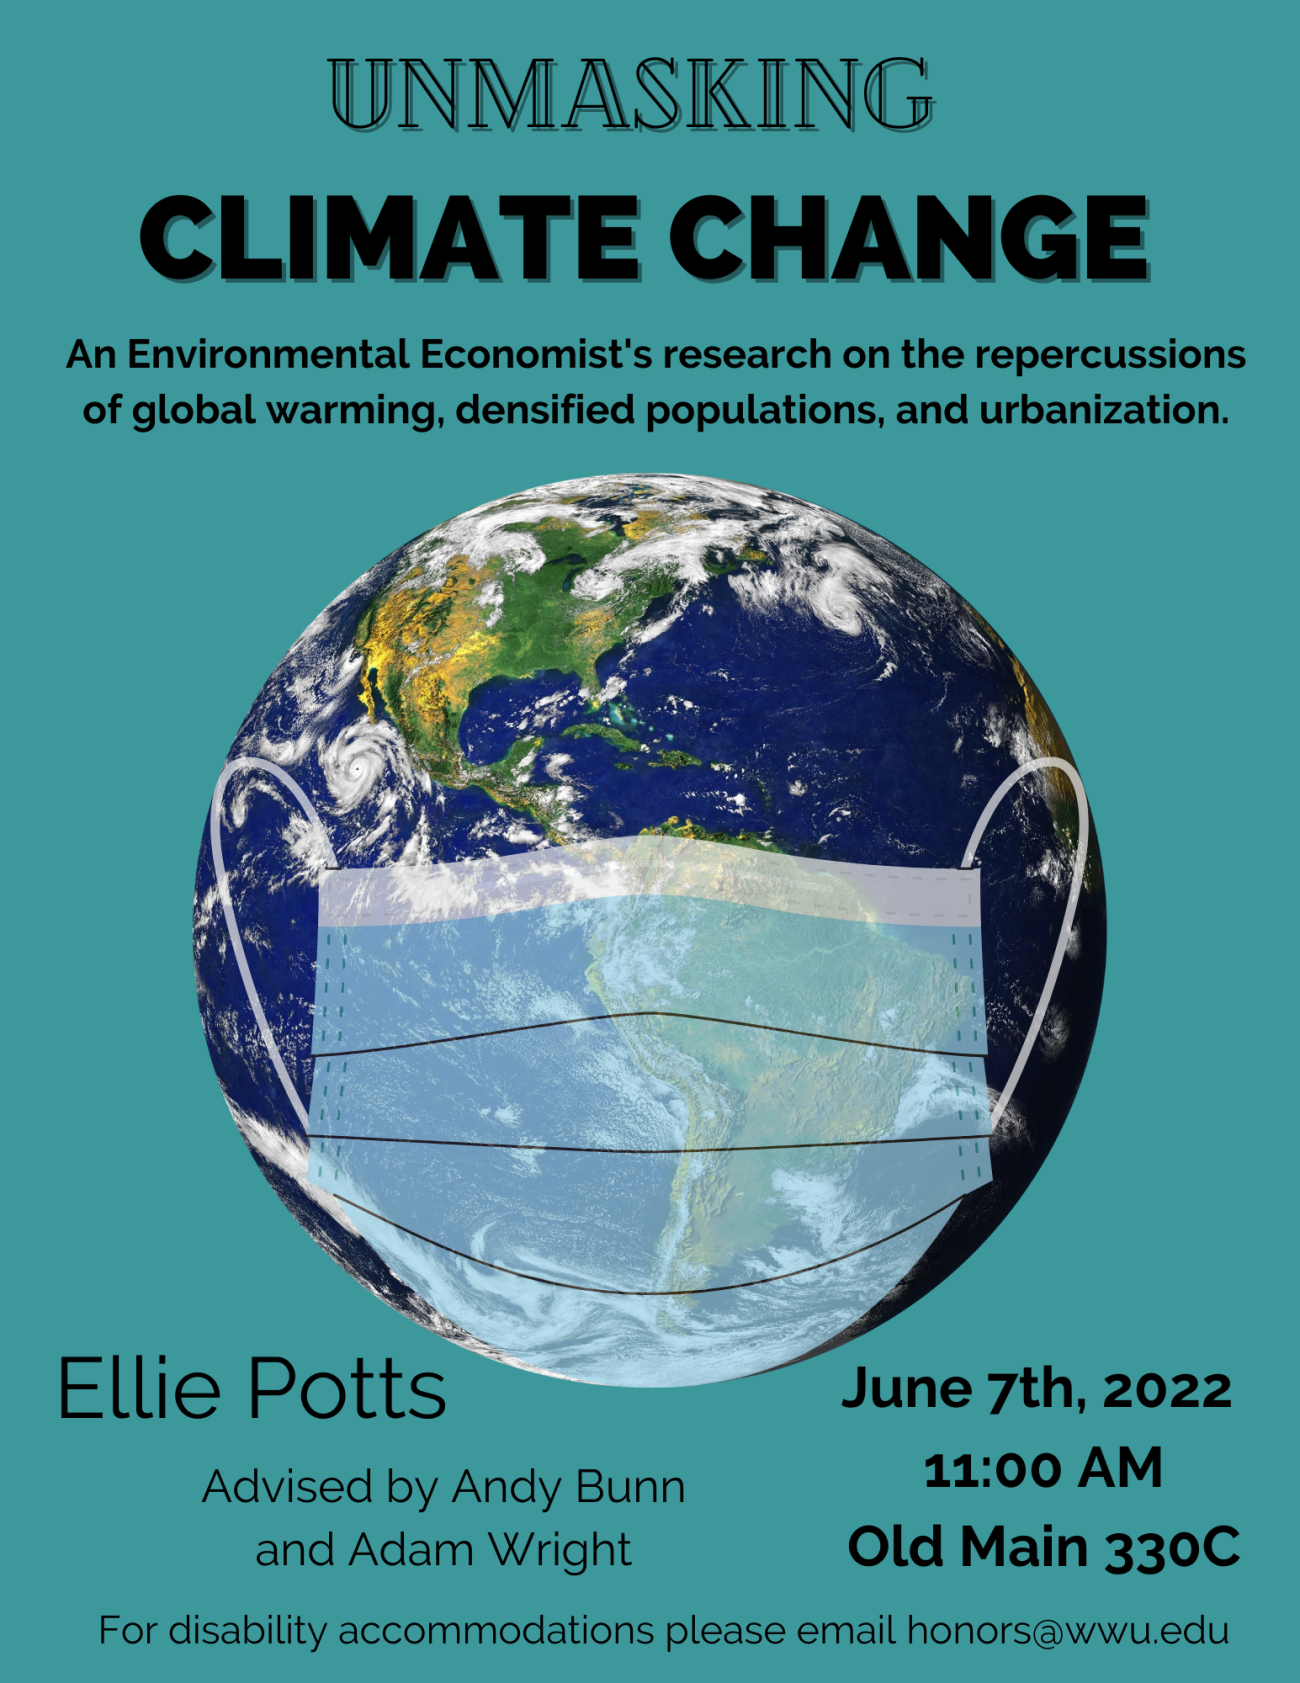 Poster with a blue background displays earth with a partially transparent face mask covering the lower half of the globe. The text reads: "Unmasking Climate Change. An Environmental Economist's research on the repercussions of global warming, densified populations, and urbanization Presented by Ellie Potts. June 7th, 2022 - 11:00 AM - Old Main 330C. Advised by Andy Bunn and Adam Wright. For disability accommodations please email honors@wwu.edu."